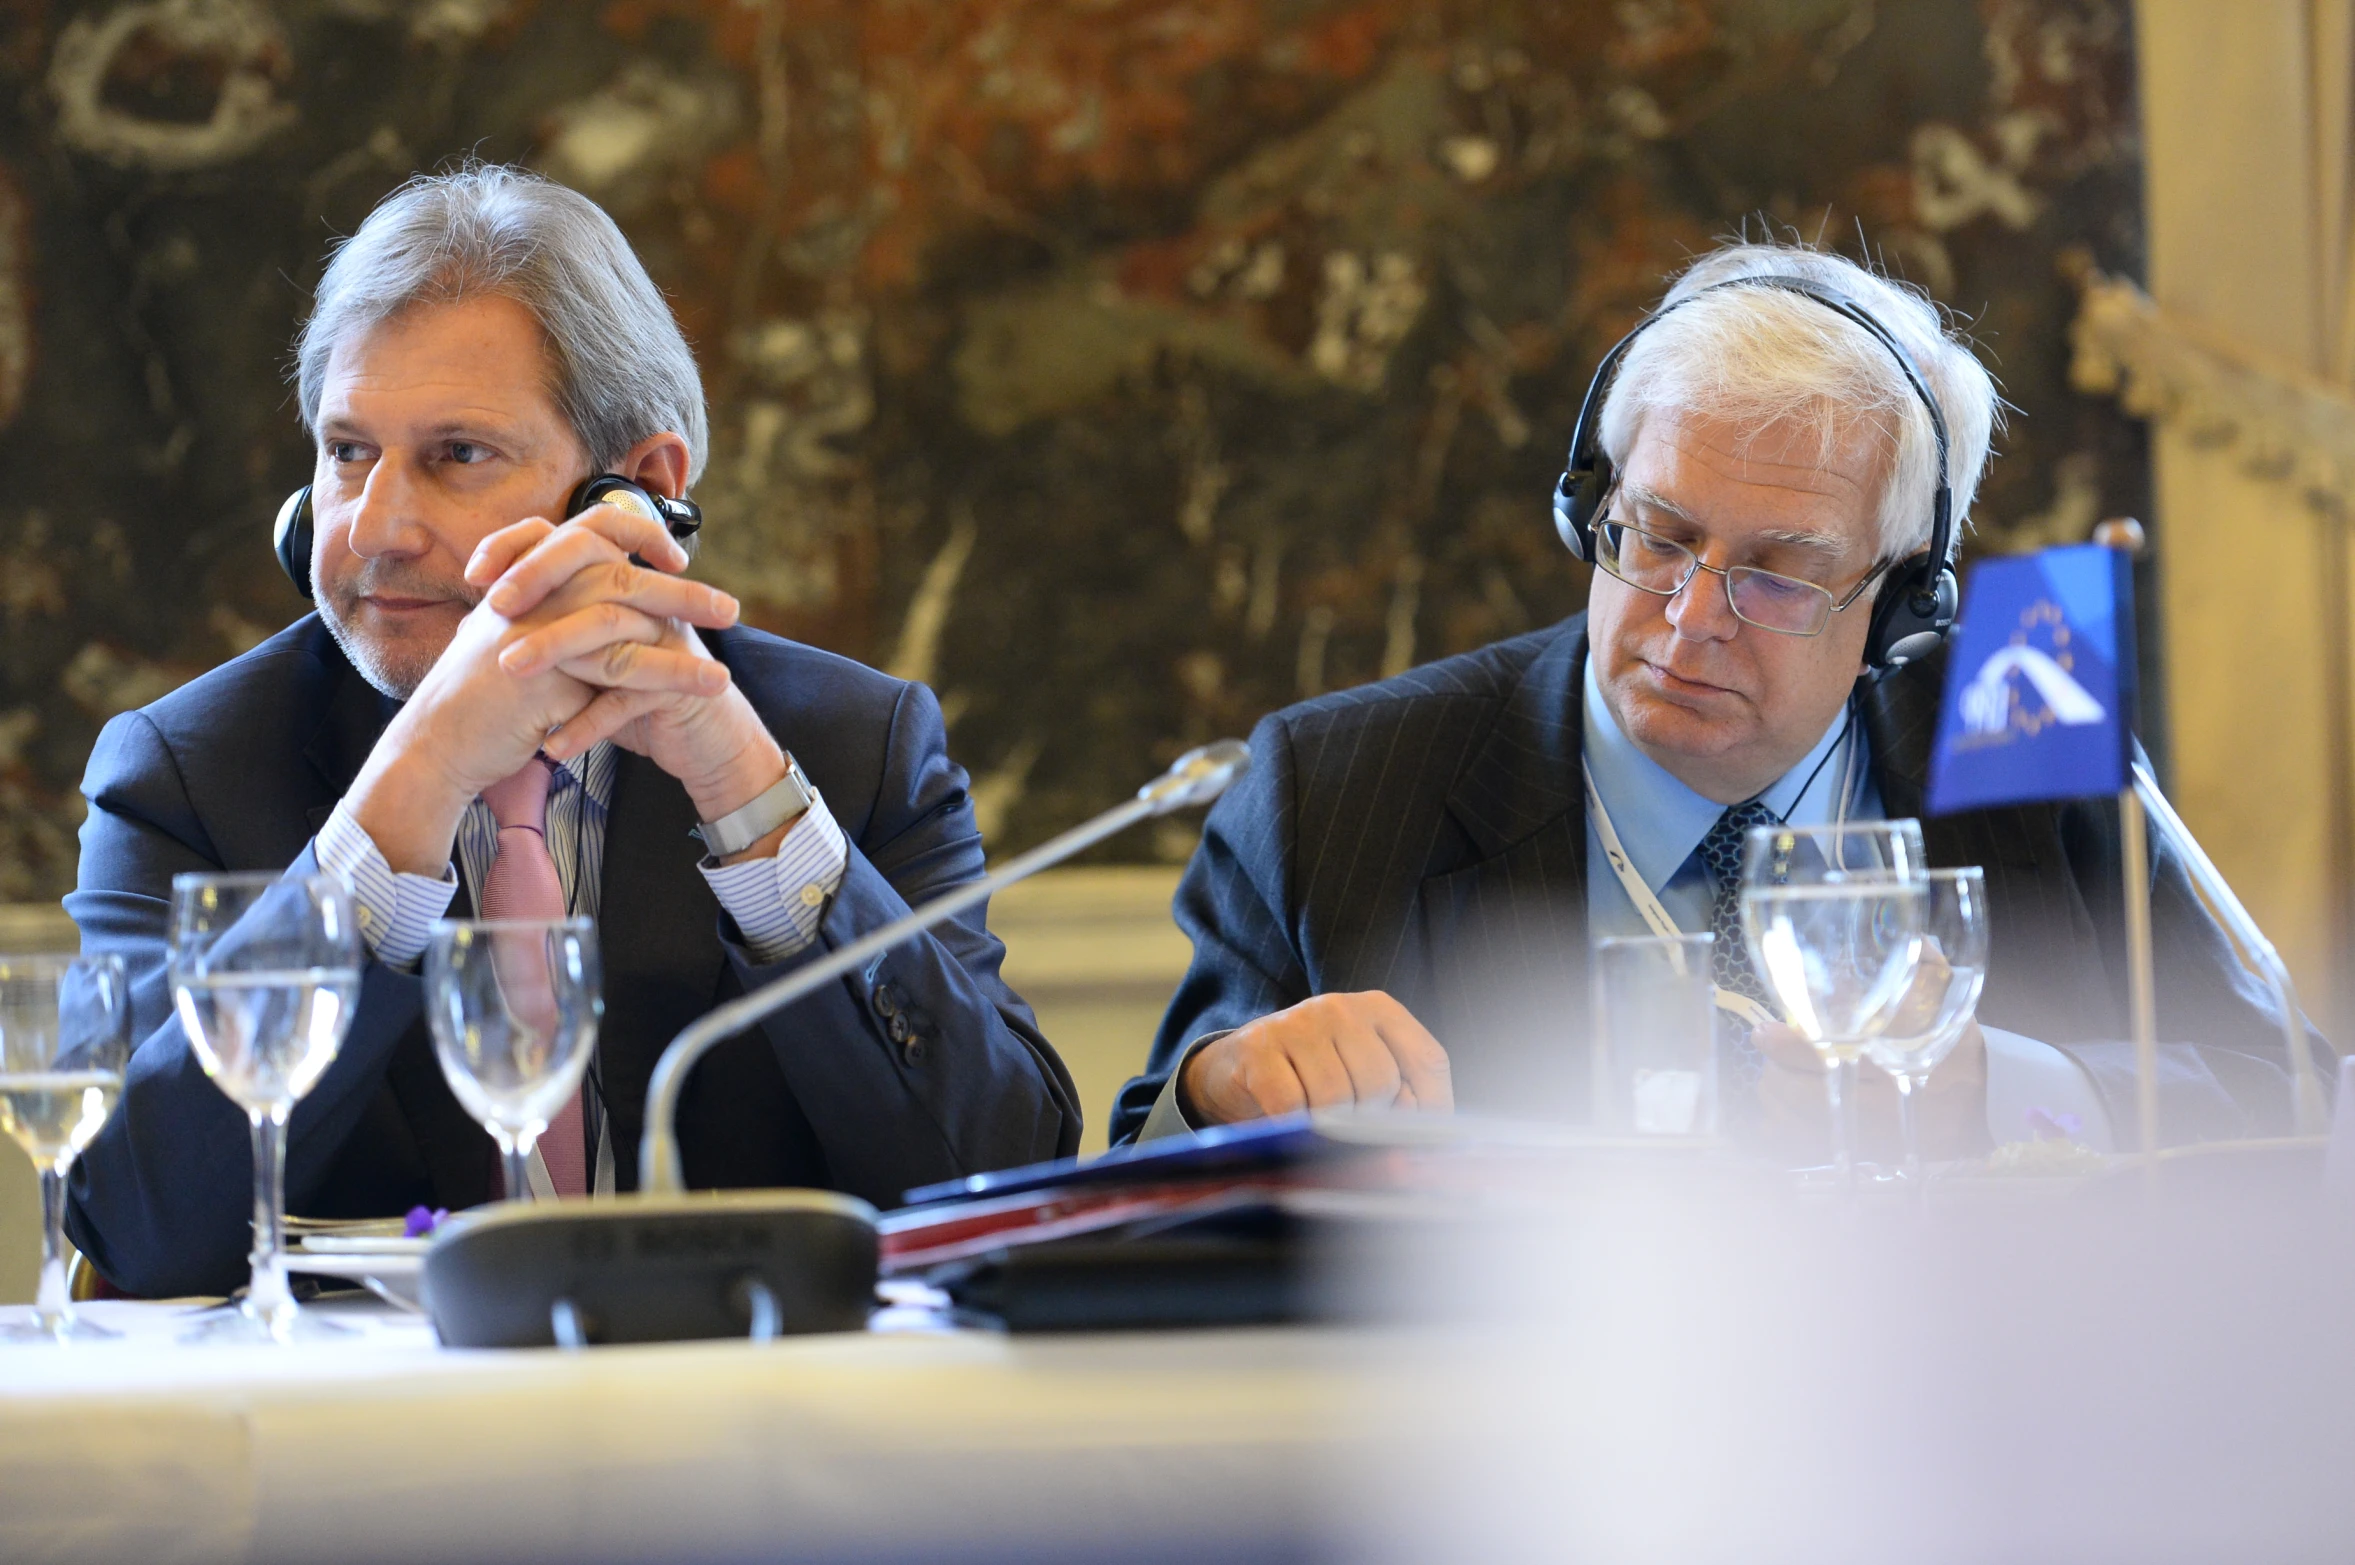 two men in suit and head phones sitting at a table